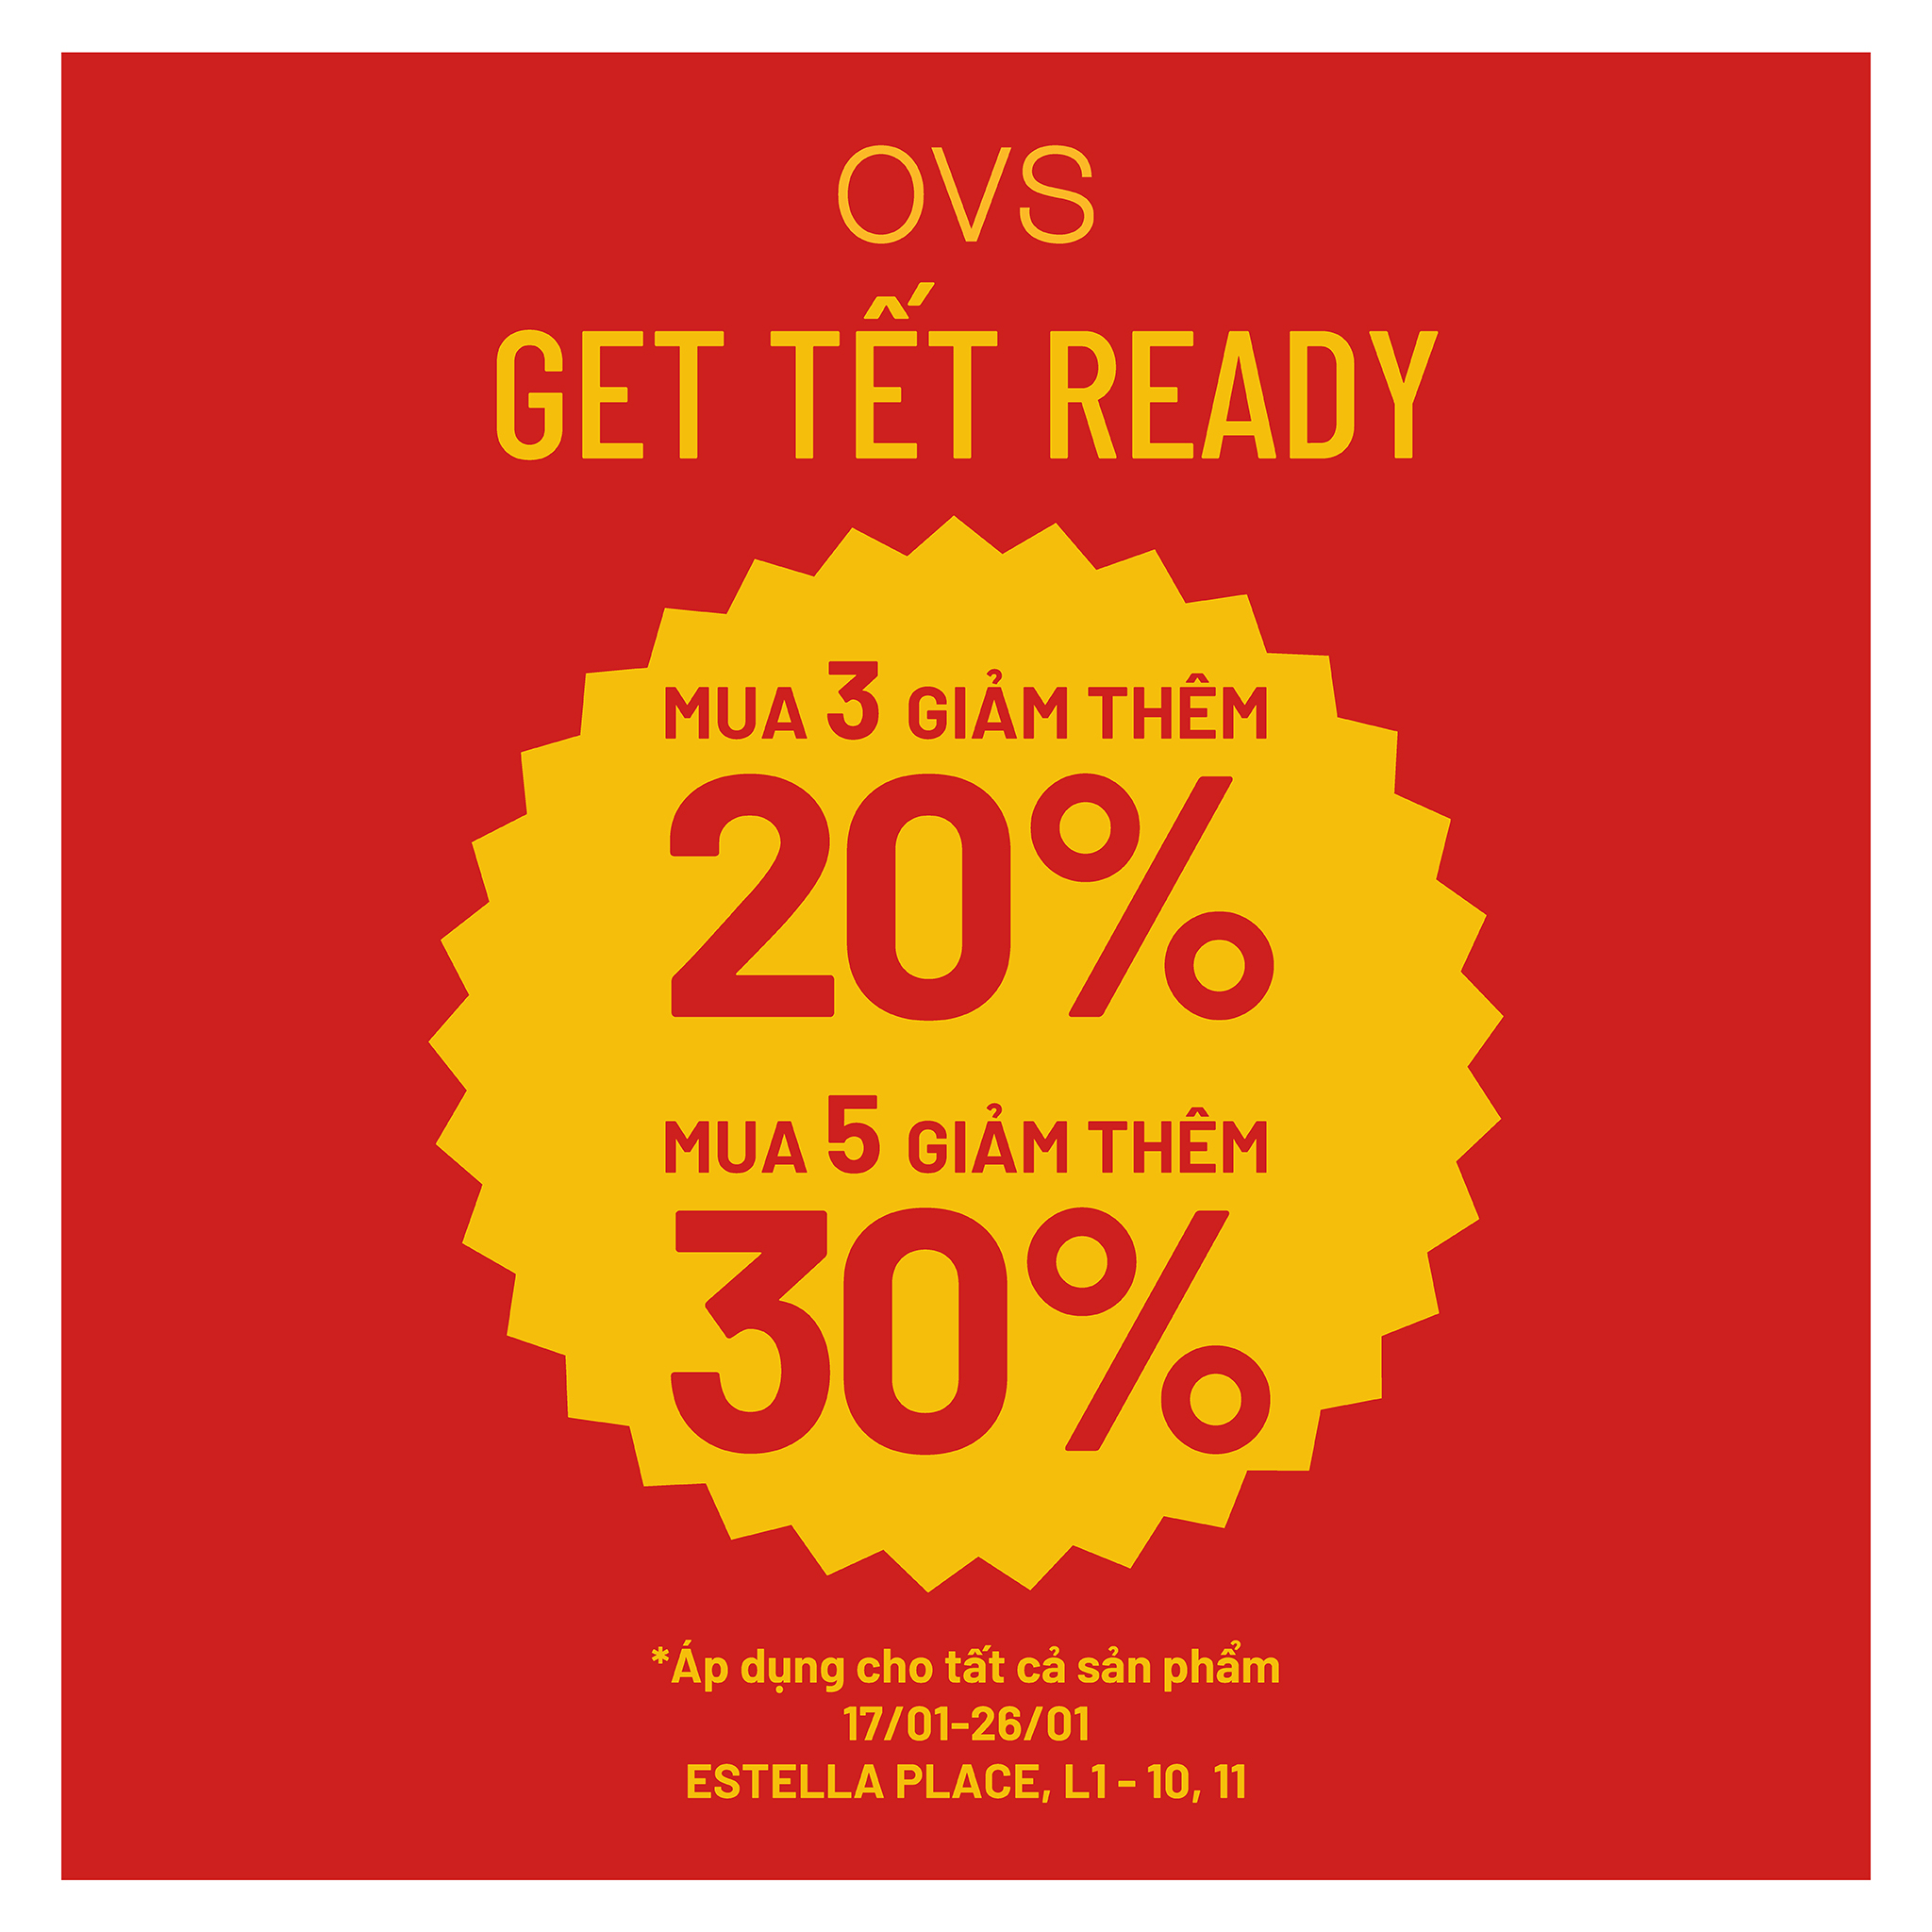 GET TET READY - BUY MORE SAVE MORE